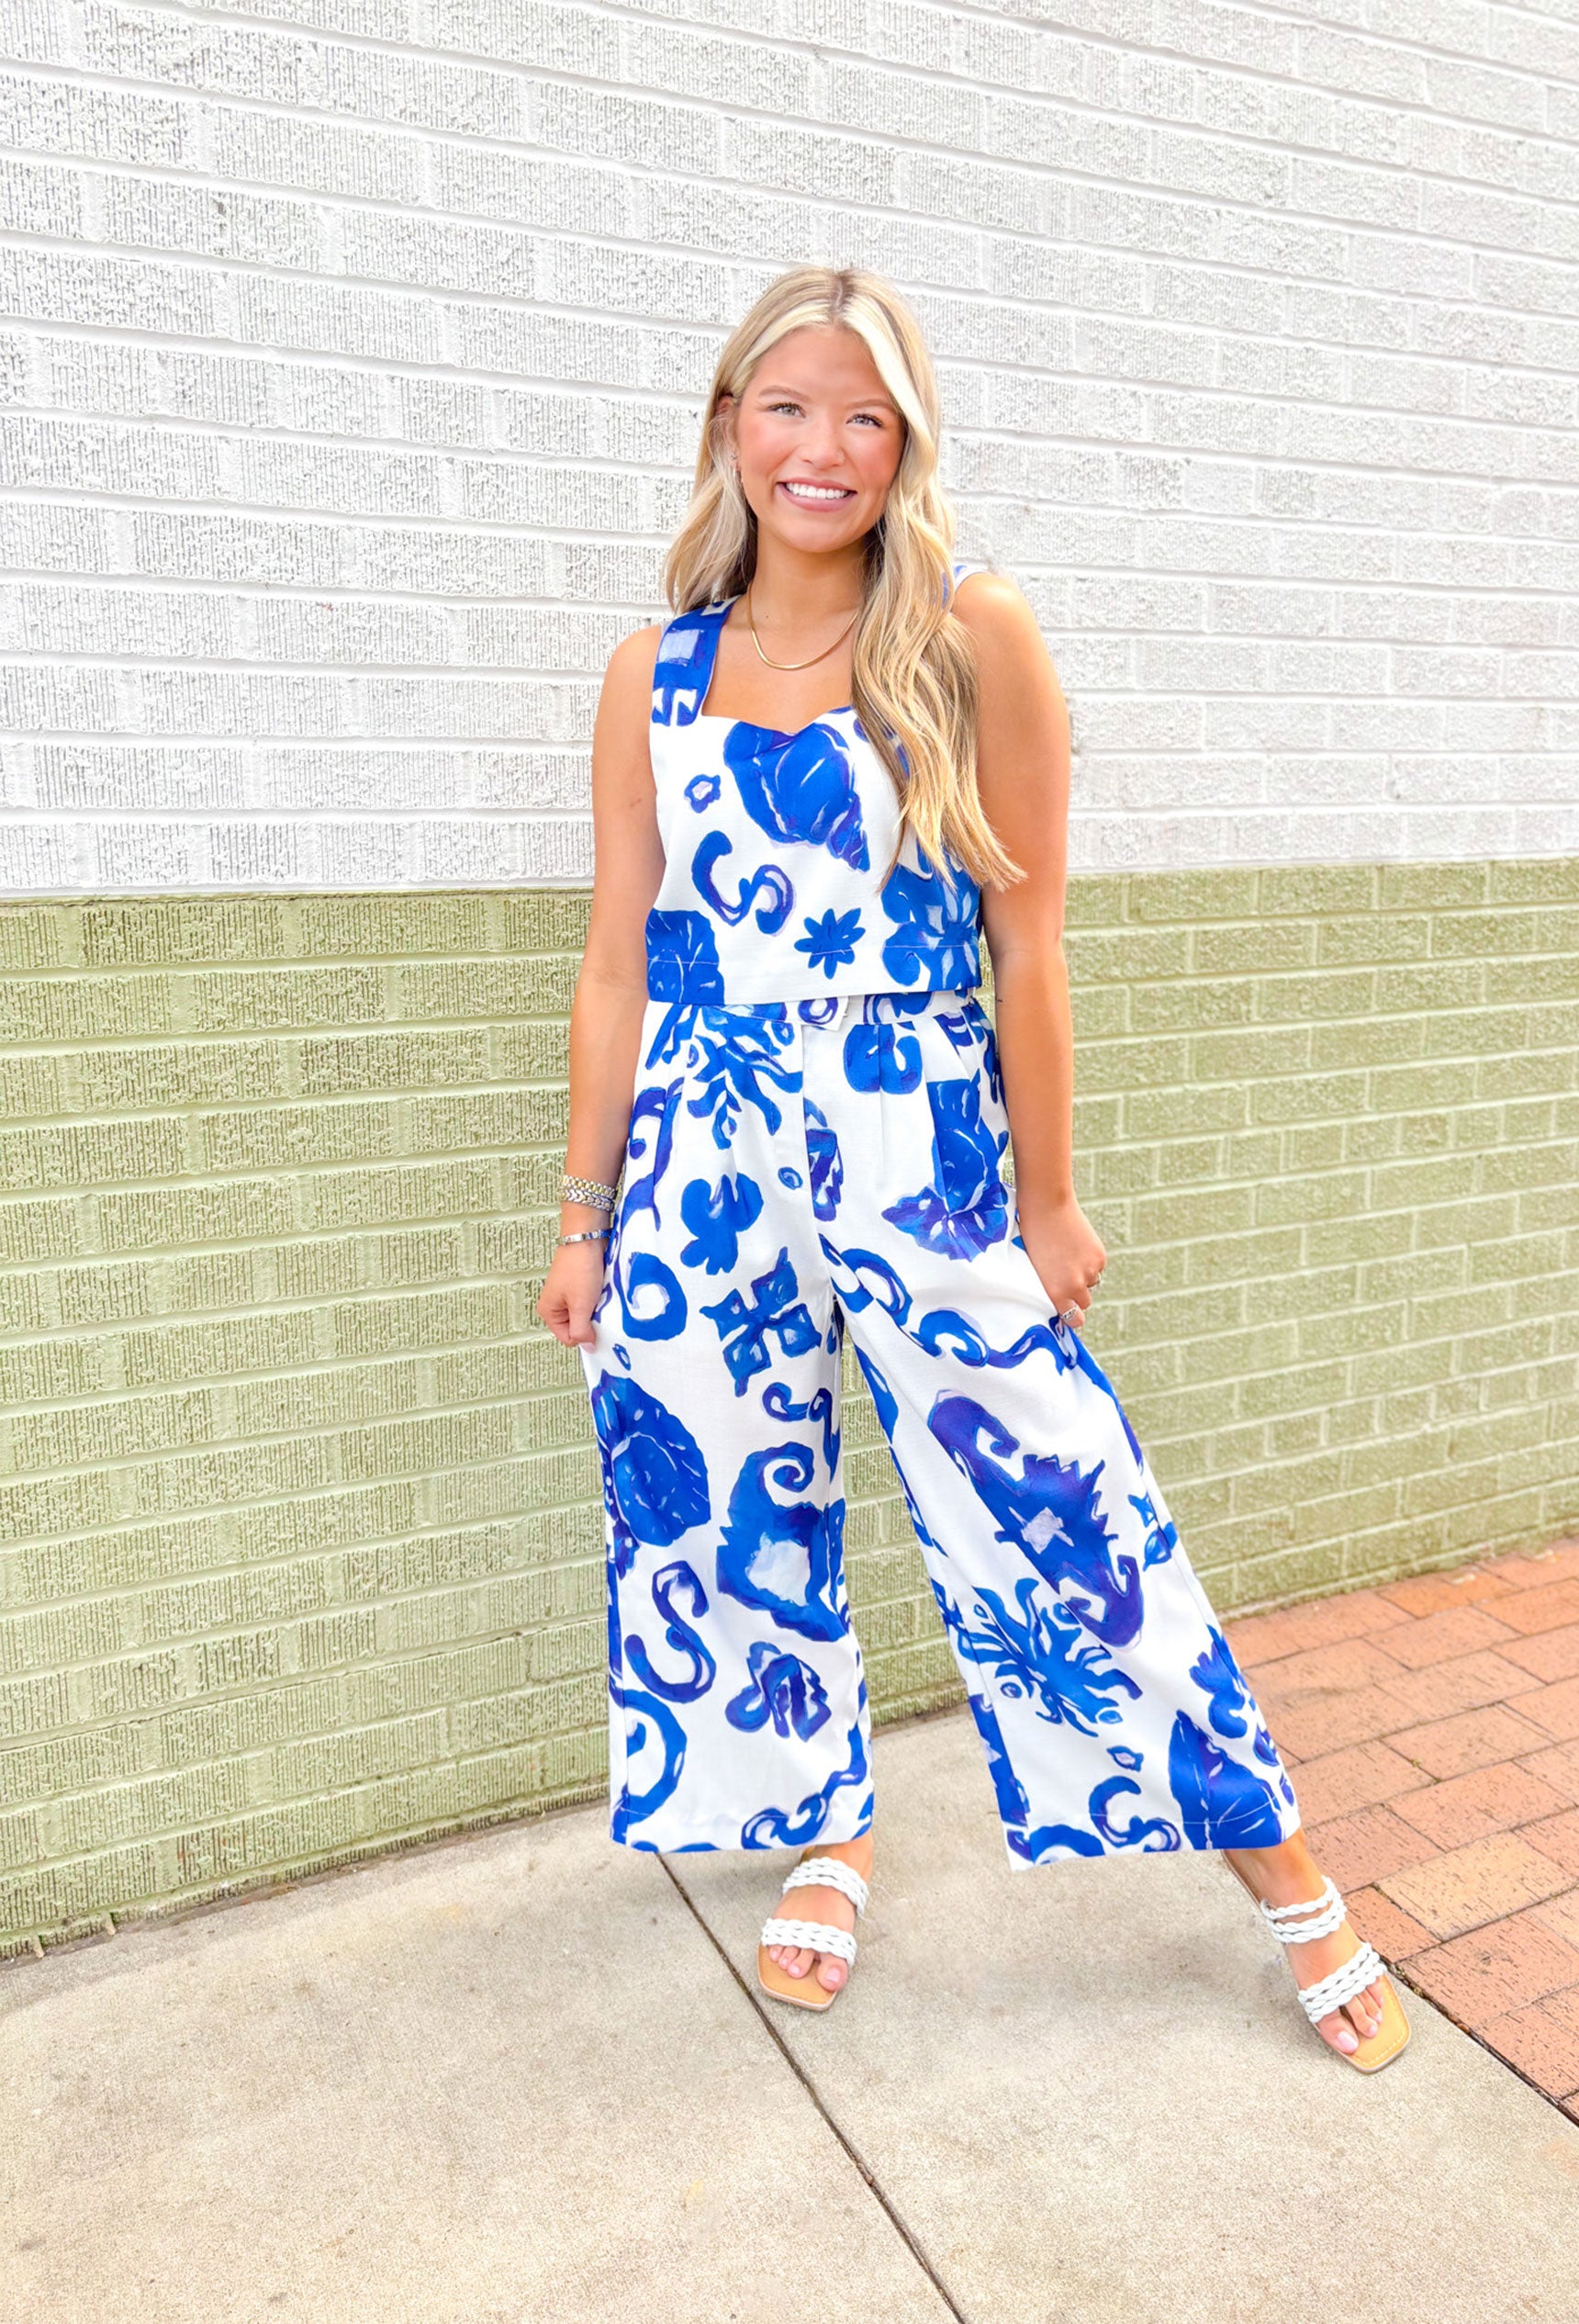 My Better Half Set, blue and white tank top and wide leg pant set with shell pattern on the top and bottom. Tank top is a square neck line and pants have slack like button feature with pockets